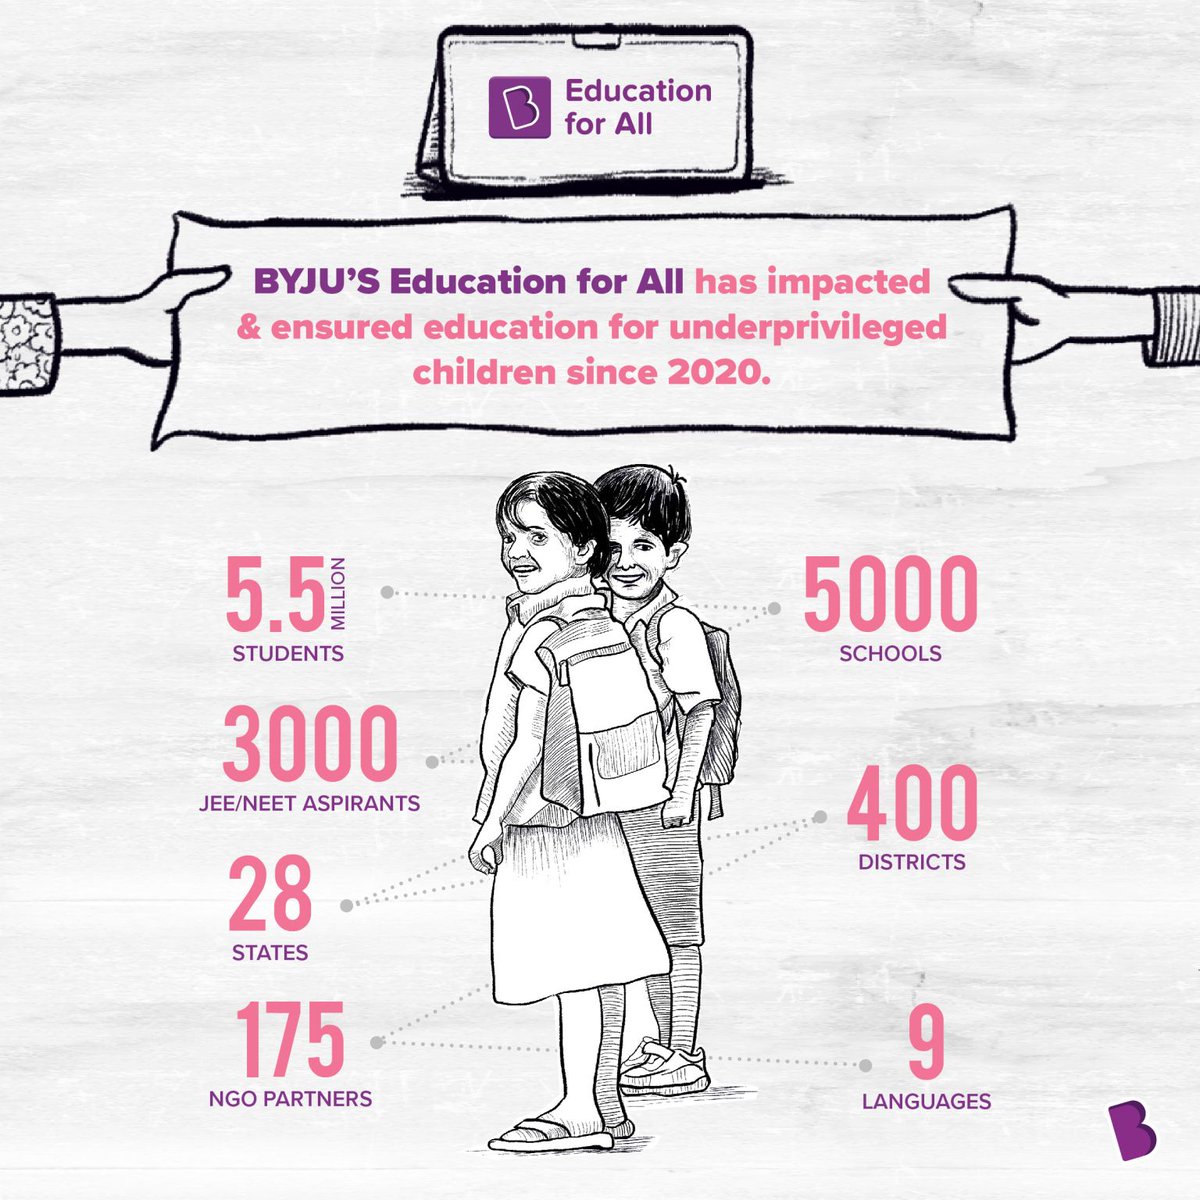 So excited for the kids who are going to be given this opportunity. This IS the long-term solution, people!

#byjus #EducationForAll #Accessibility #Impact #students #enhanceyourpotential